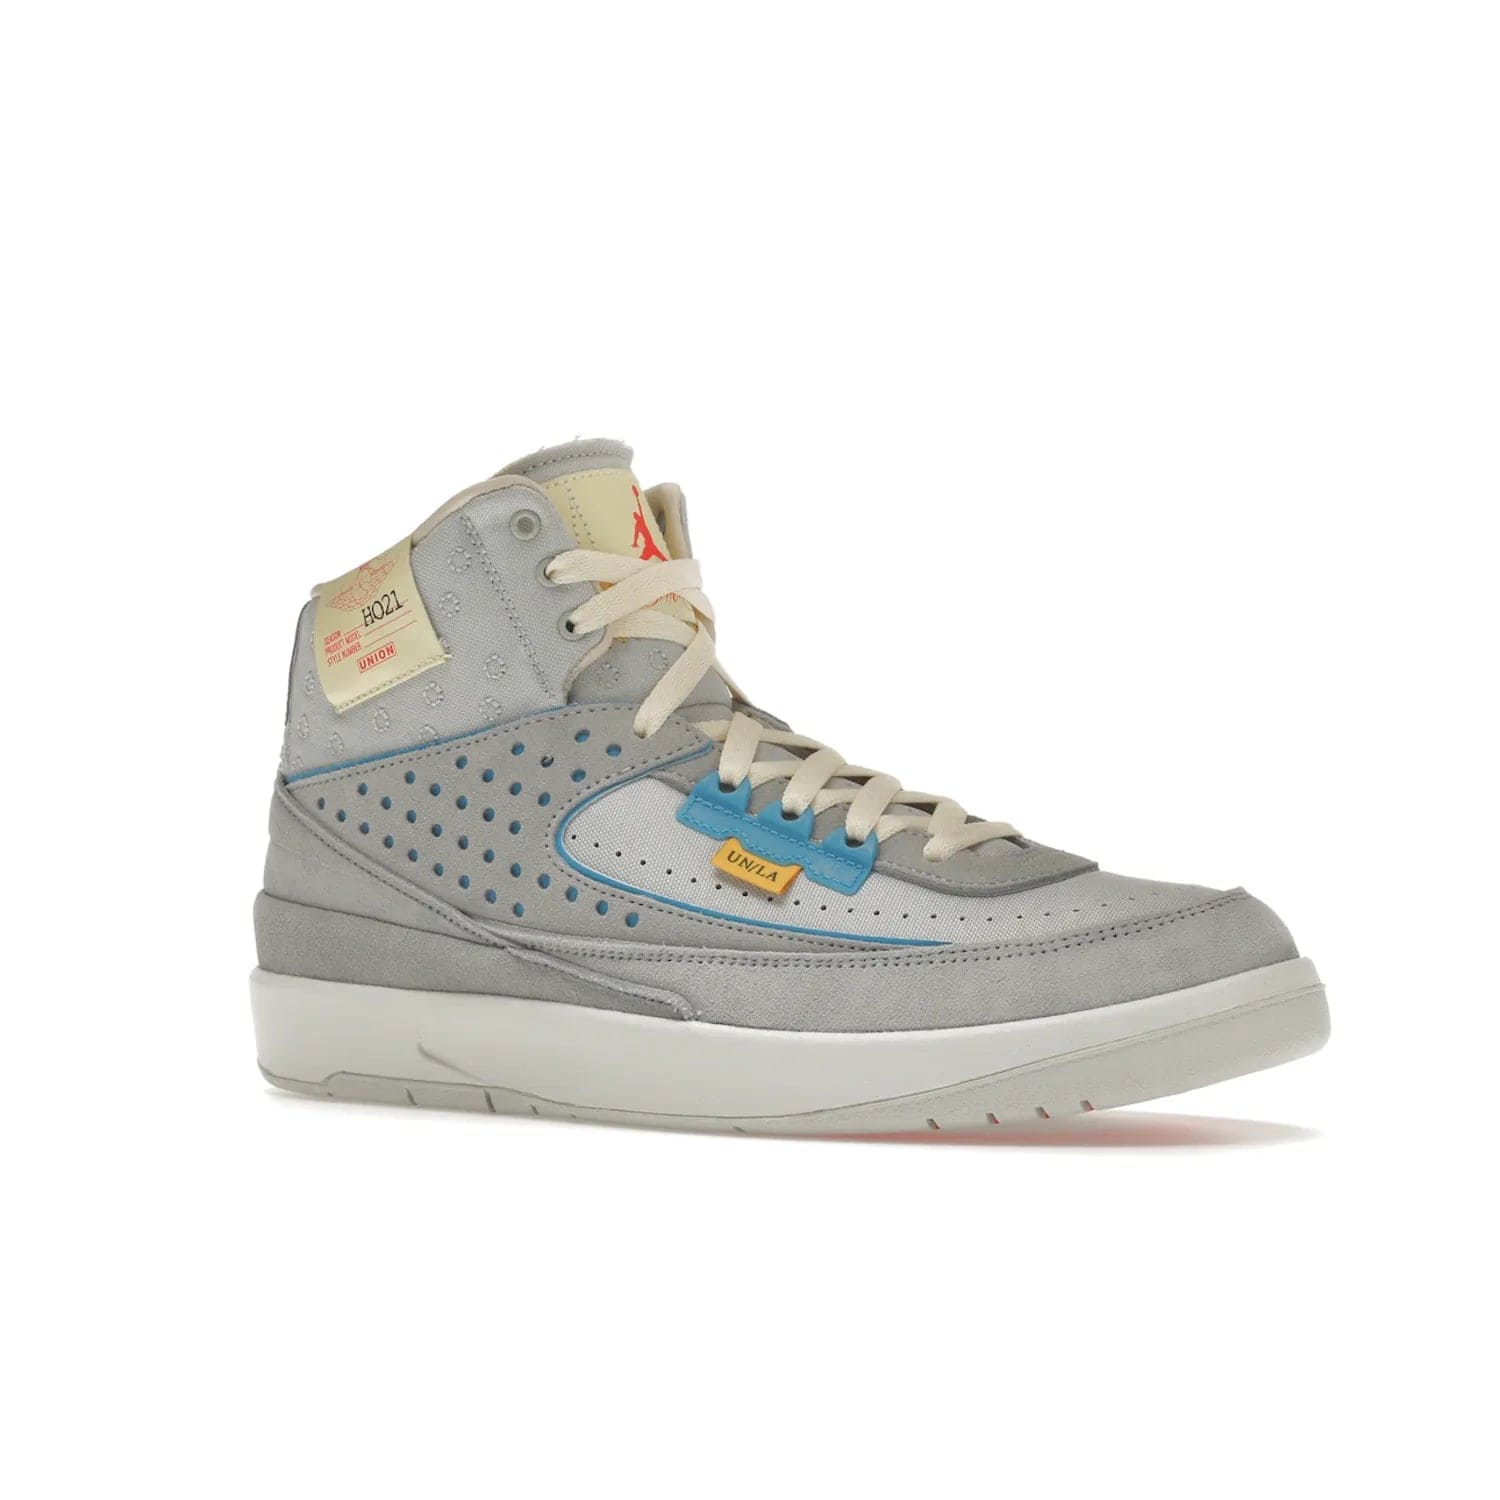 Jordan 2 Retro SP Union Grey Fog - Image 4 - Only at www.BallersClubKickz.com - Introducing the Air Jordan 2 Retro SP Union Grey Fog. This intricate sneaker design features a grey canvas upper with light blue eyelets, eyestay patches, and piping, plus custom external tags. Dropping in April 2022, this exclusive release offers a worn-in look and feel.